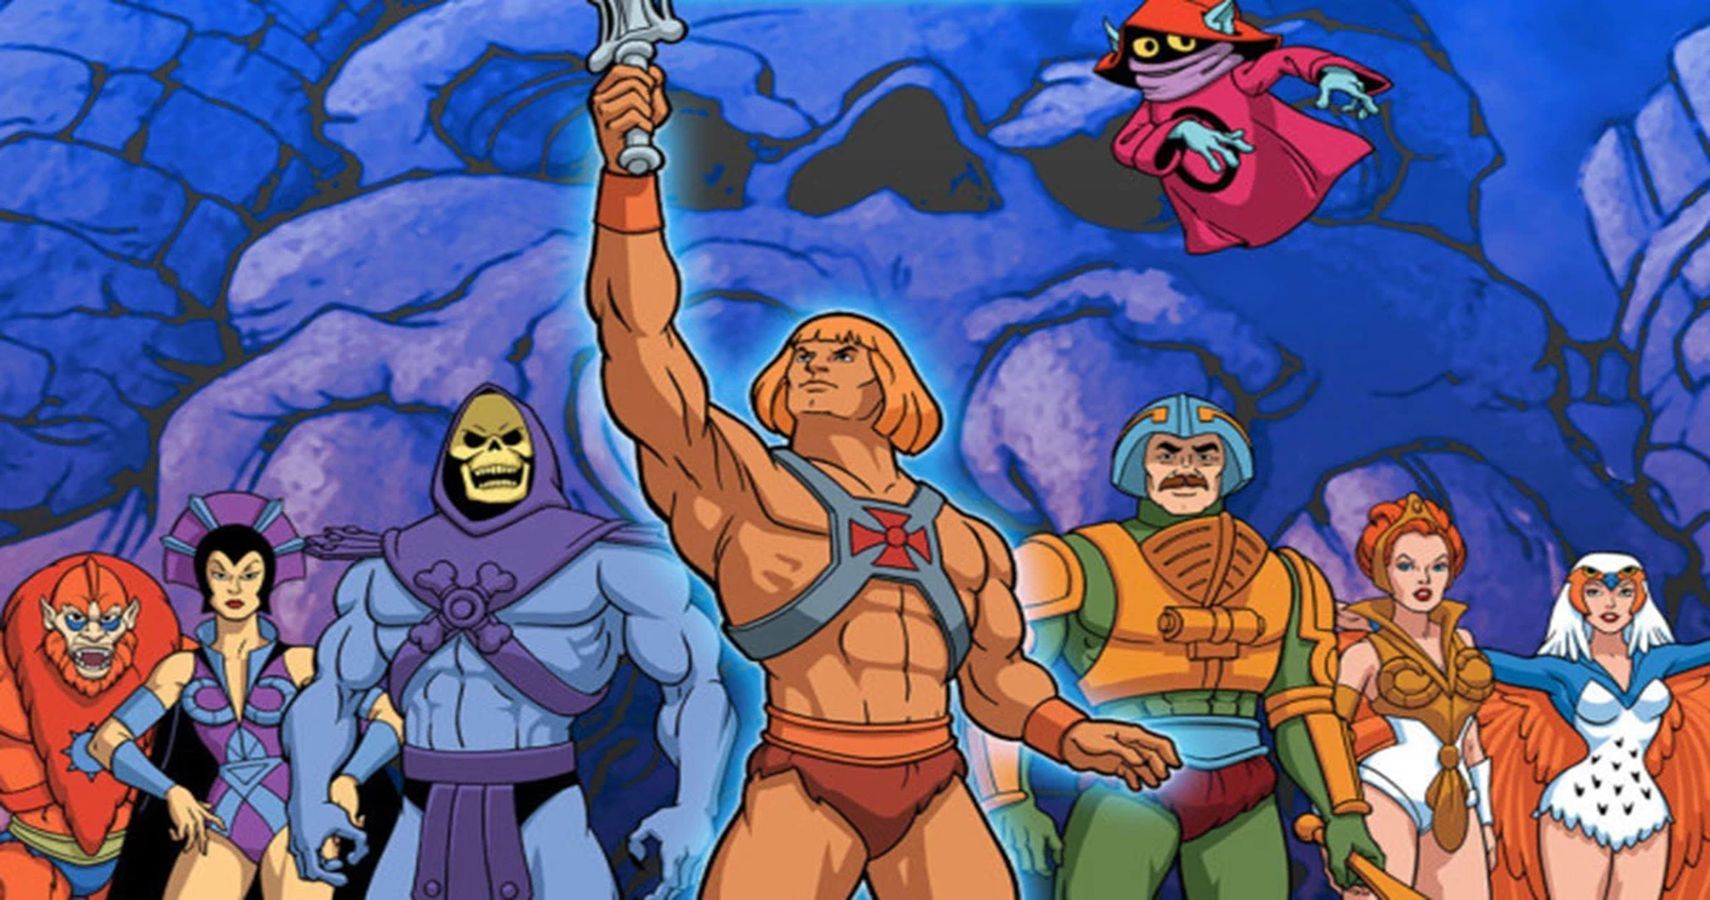 He-Man: 10 Original Series Episodes To Watch Before The Netflix Series